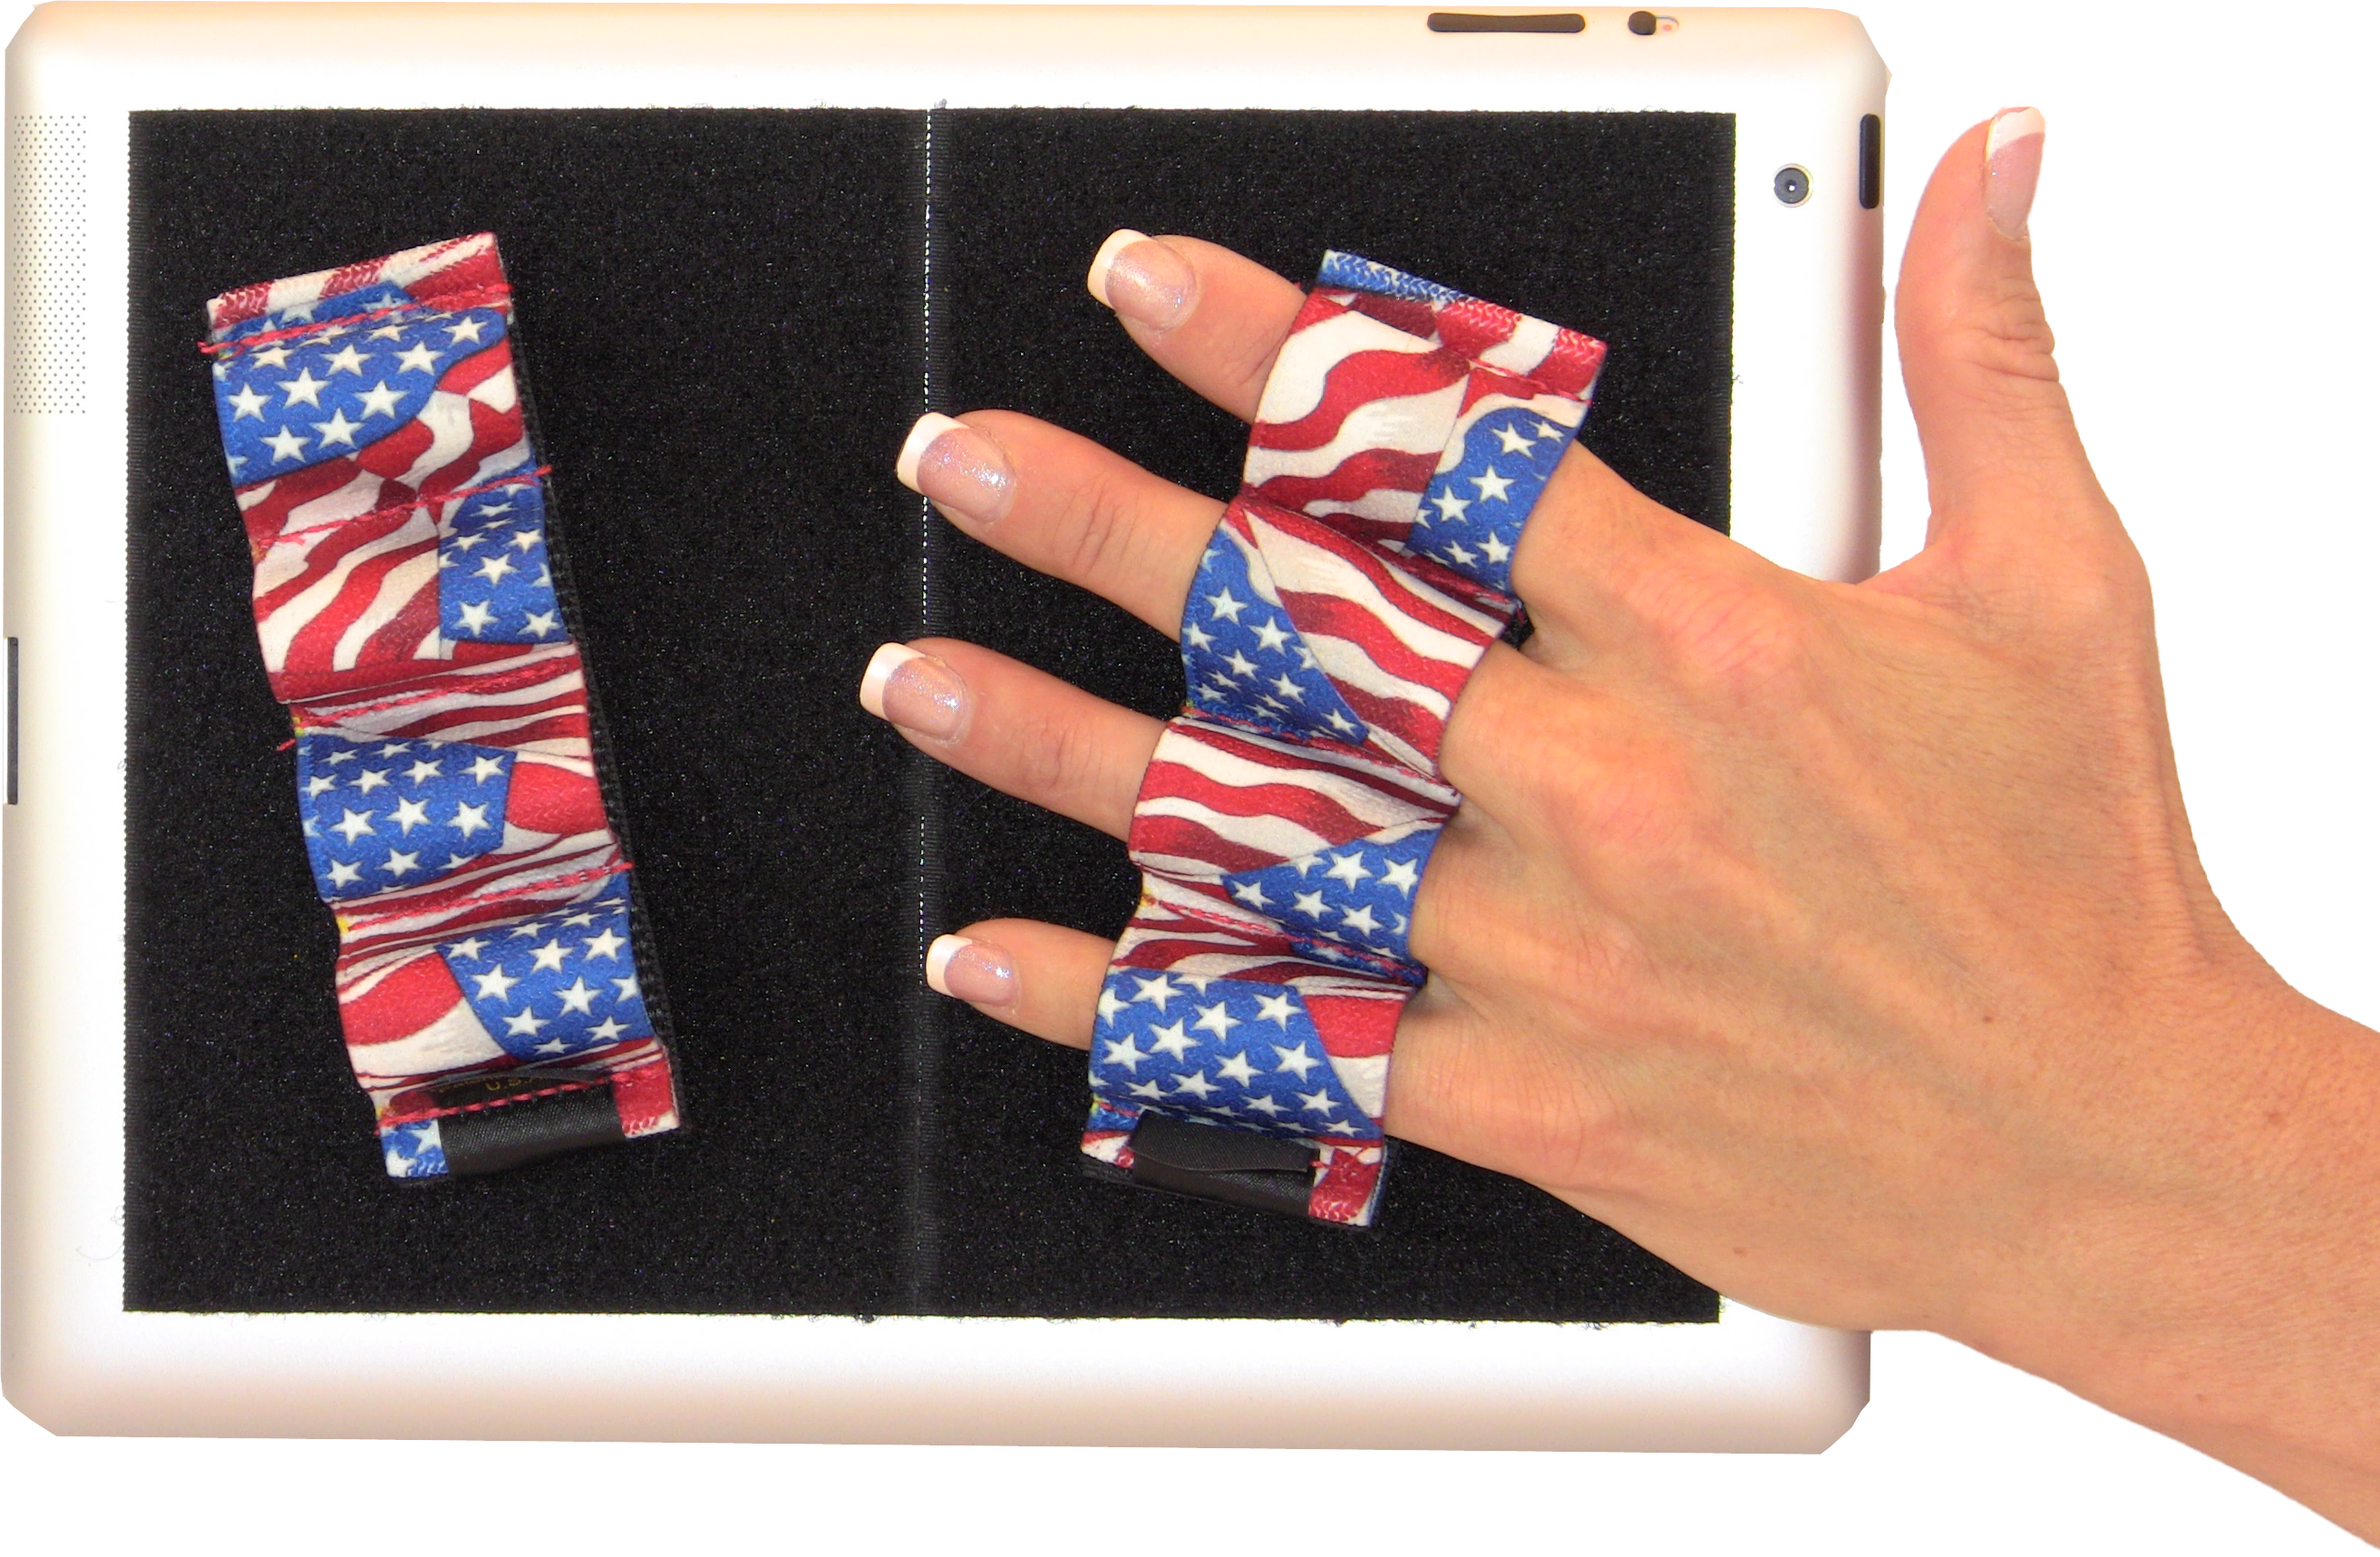 Heavy Duty 4-Loop Grips for iPad or Large Tablet (x2) - Flags